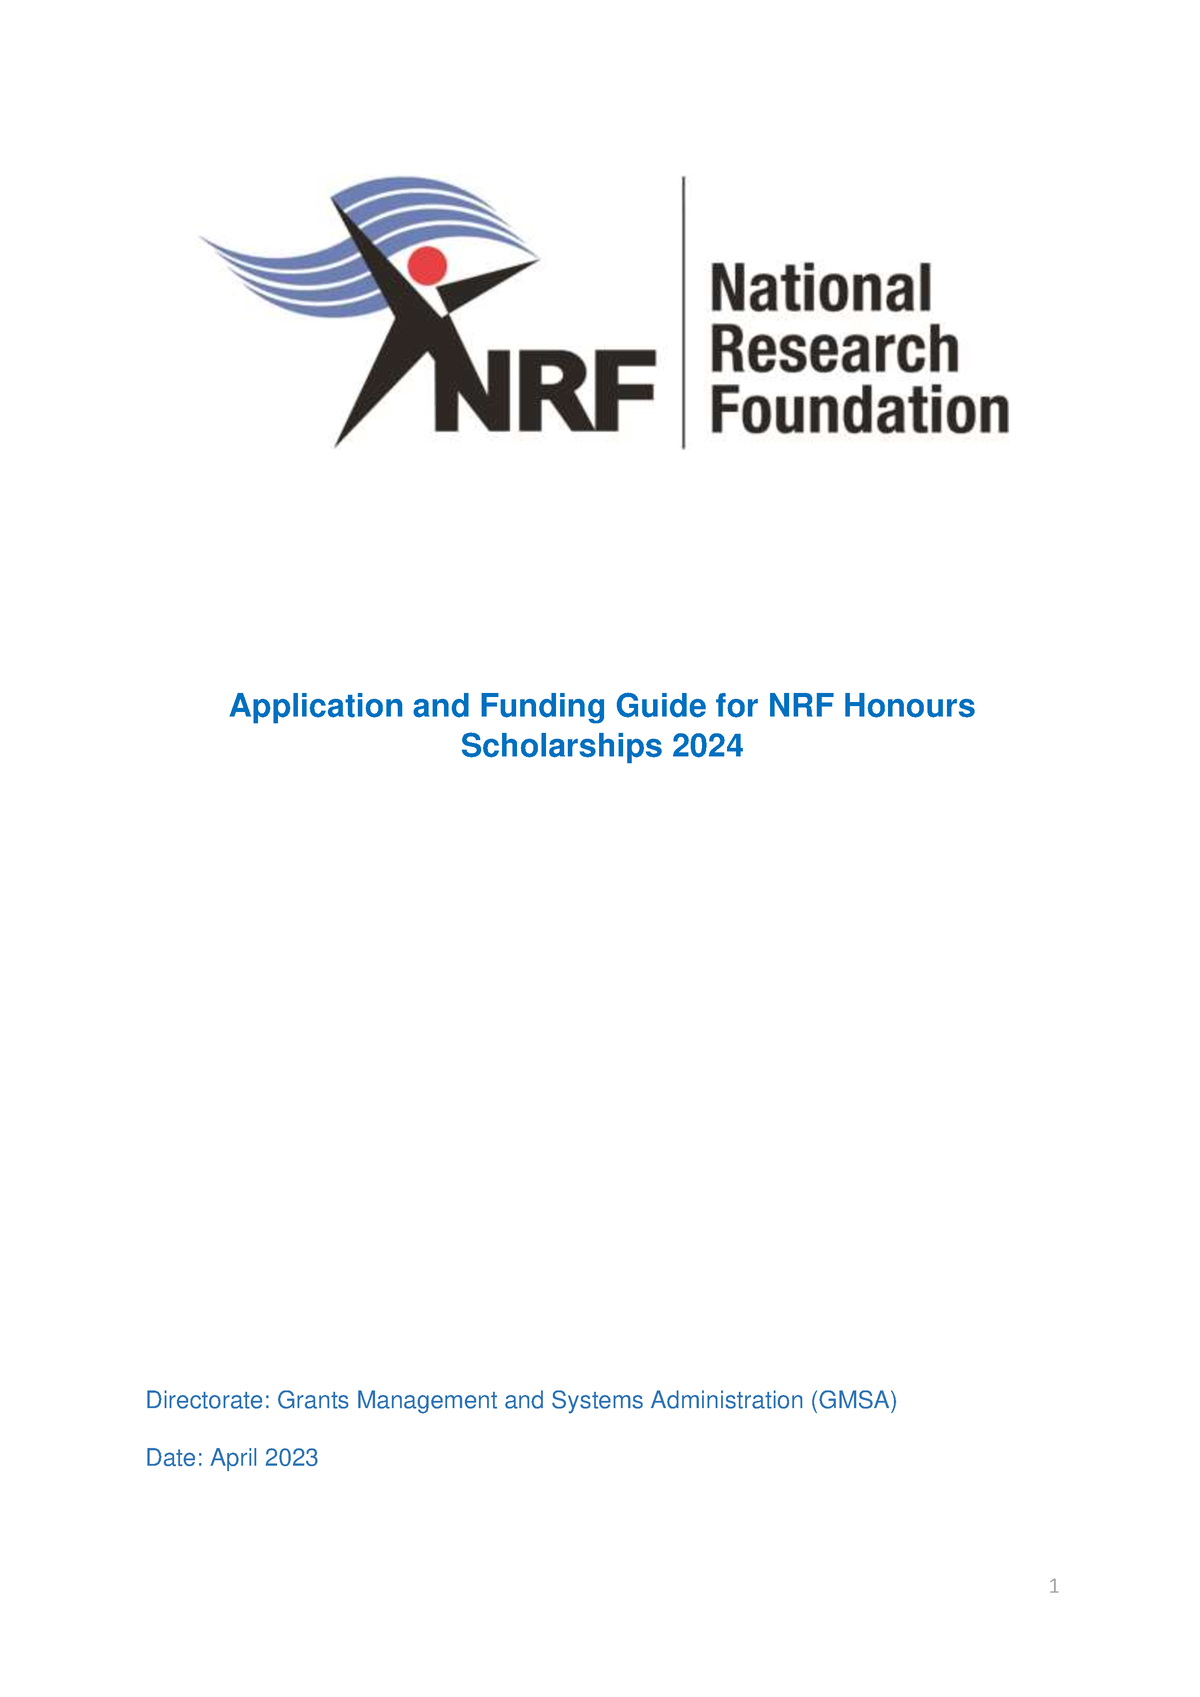 DSI NRF Honours Application and Funding Guide for 2024 Application